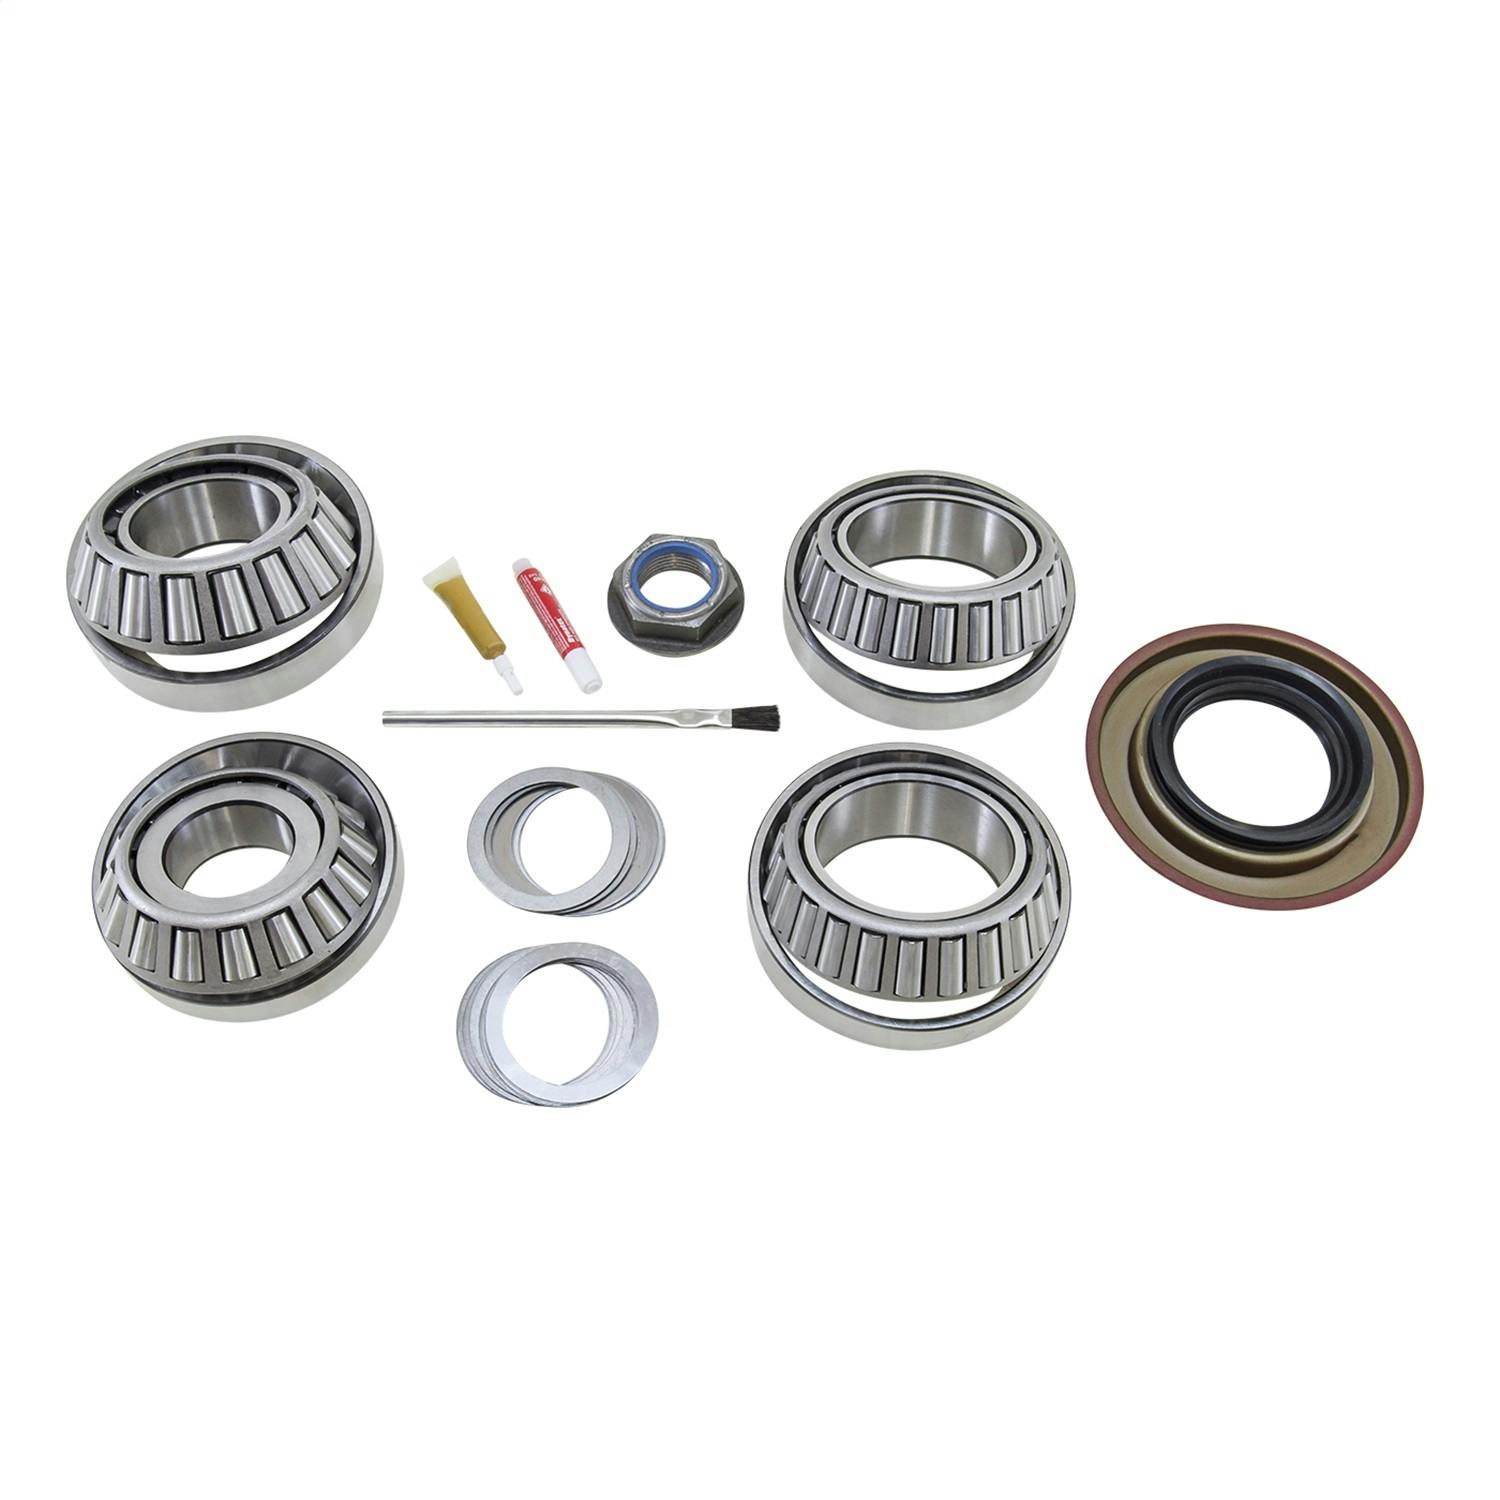 USA Standard Gear ZK DS135 Differential Rebuild Kit